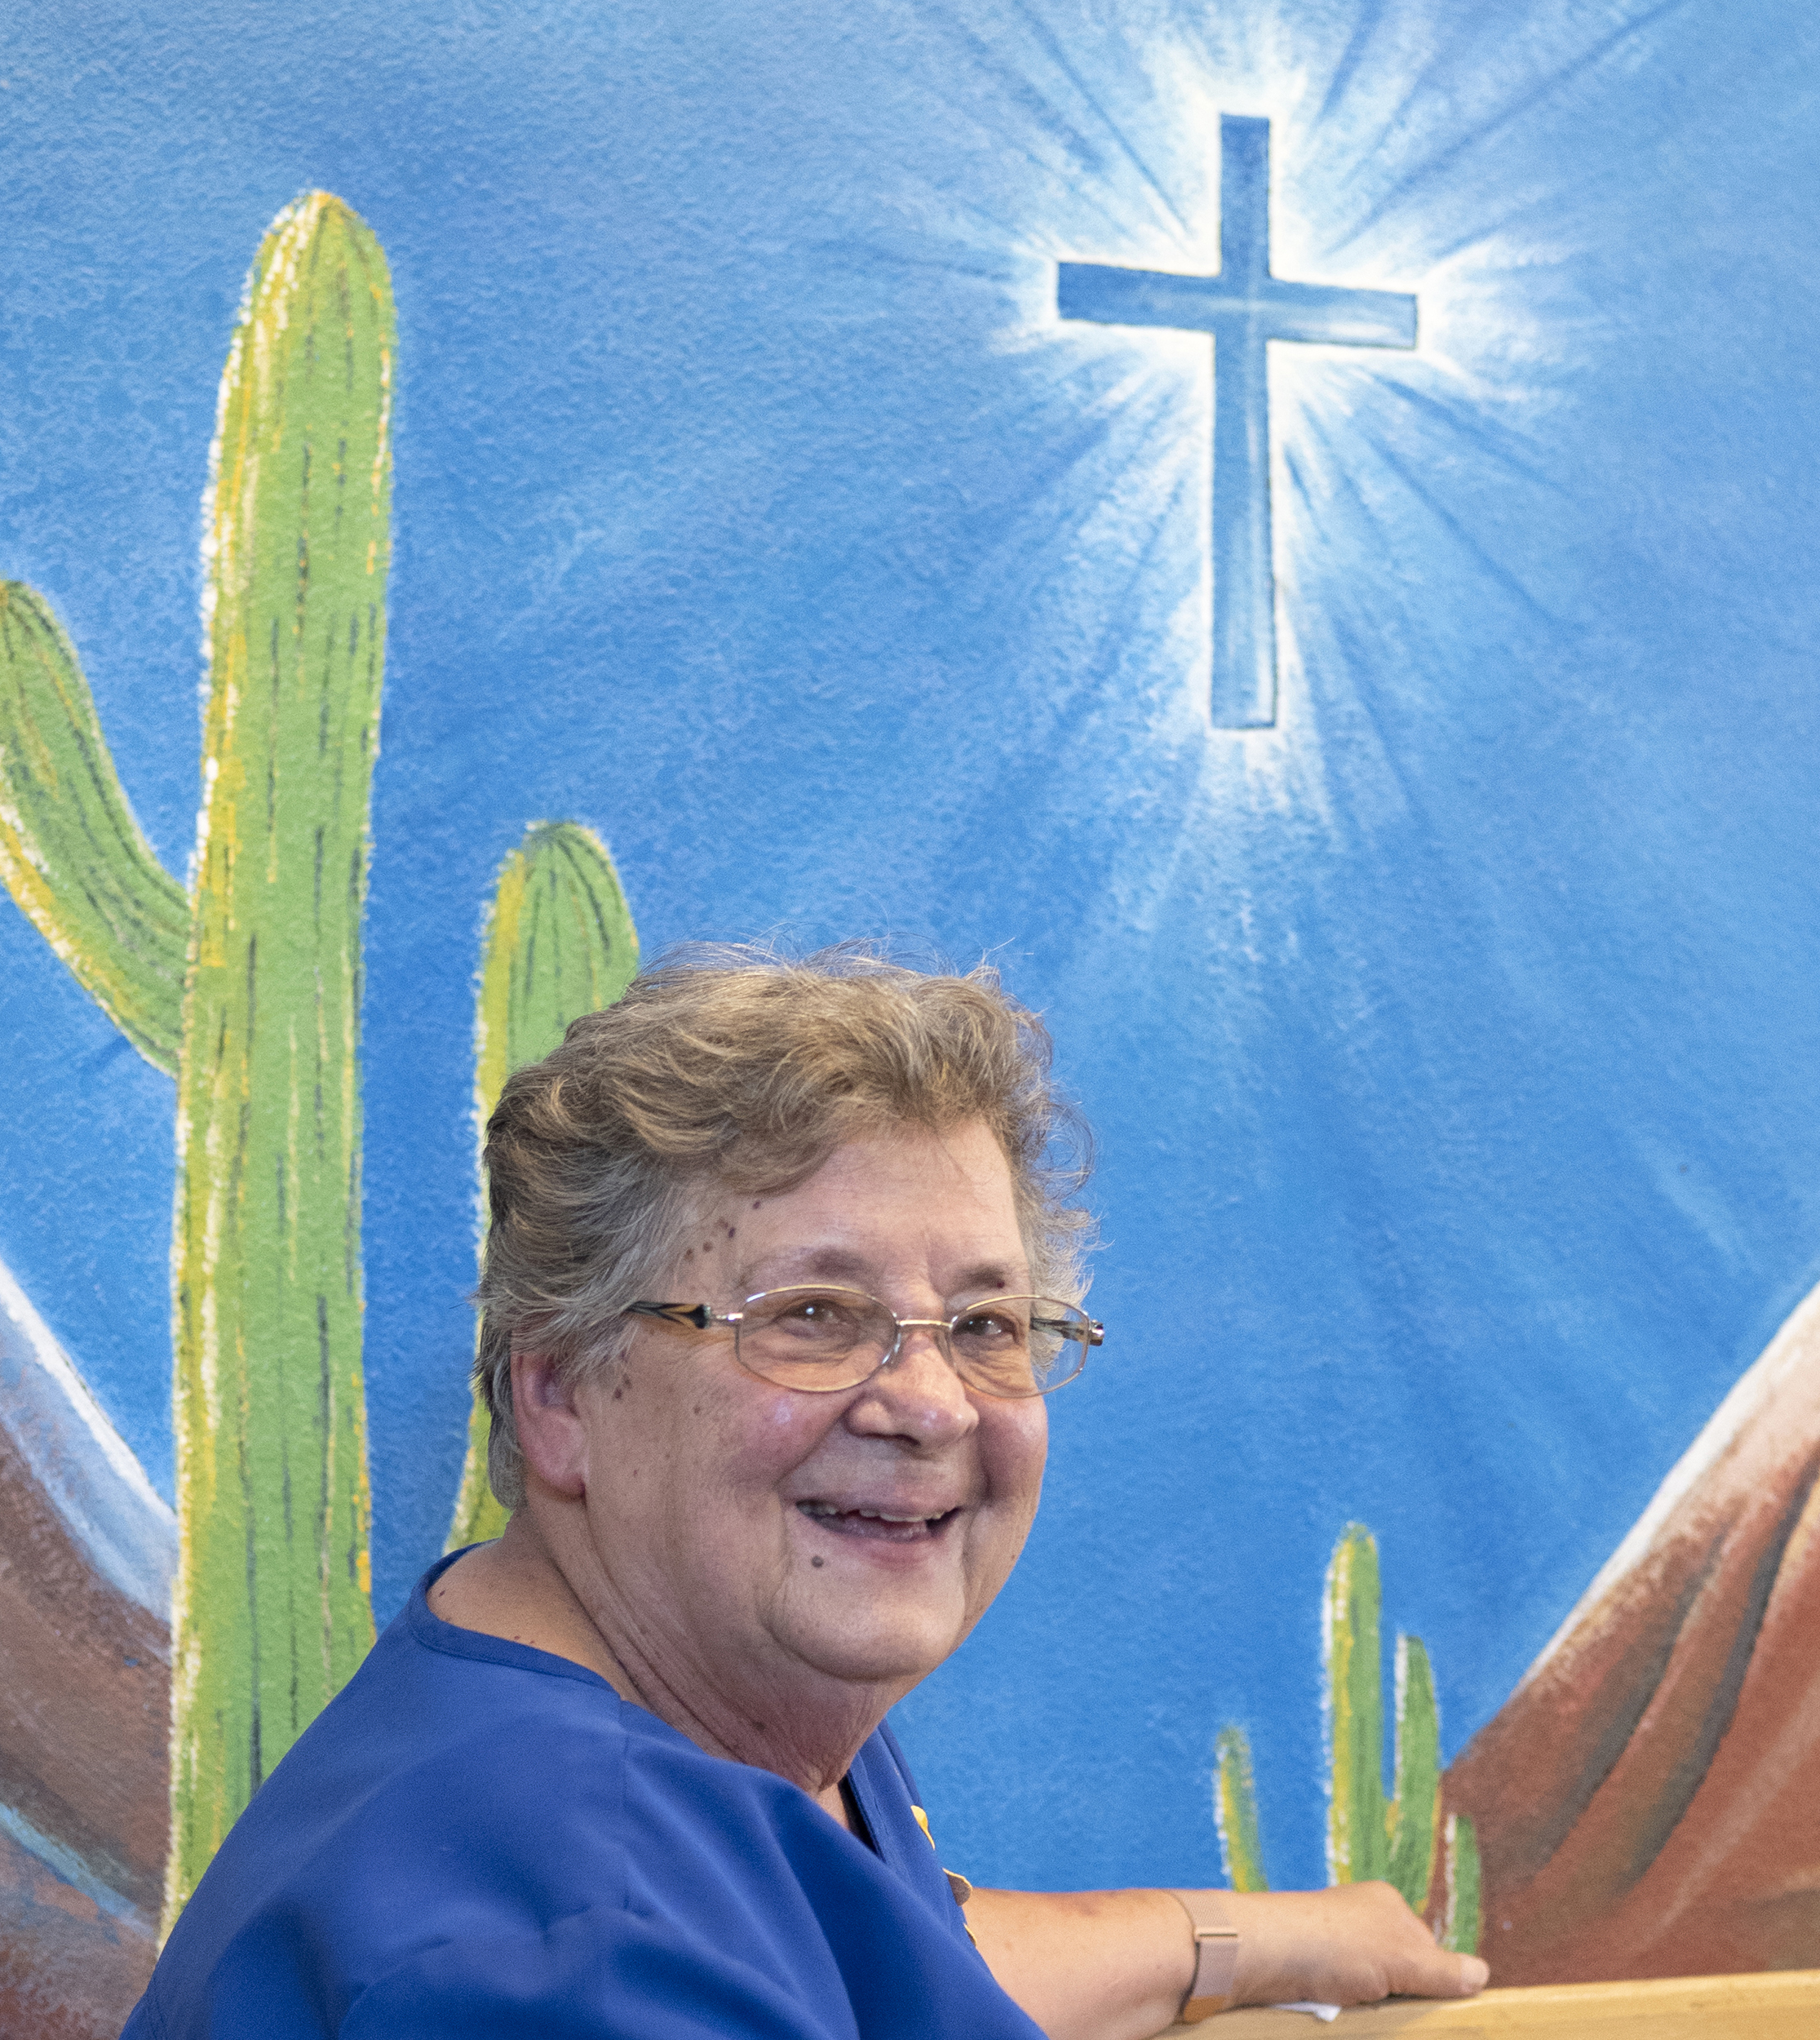 Sister Nancy has round-rimmed glasses and short salt and pepper hair. She smiles while wearing a blue top and sits under a wall mural with a green cactus and white cross.